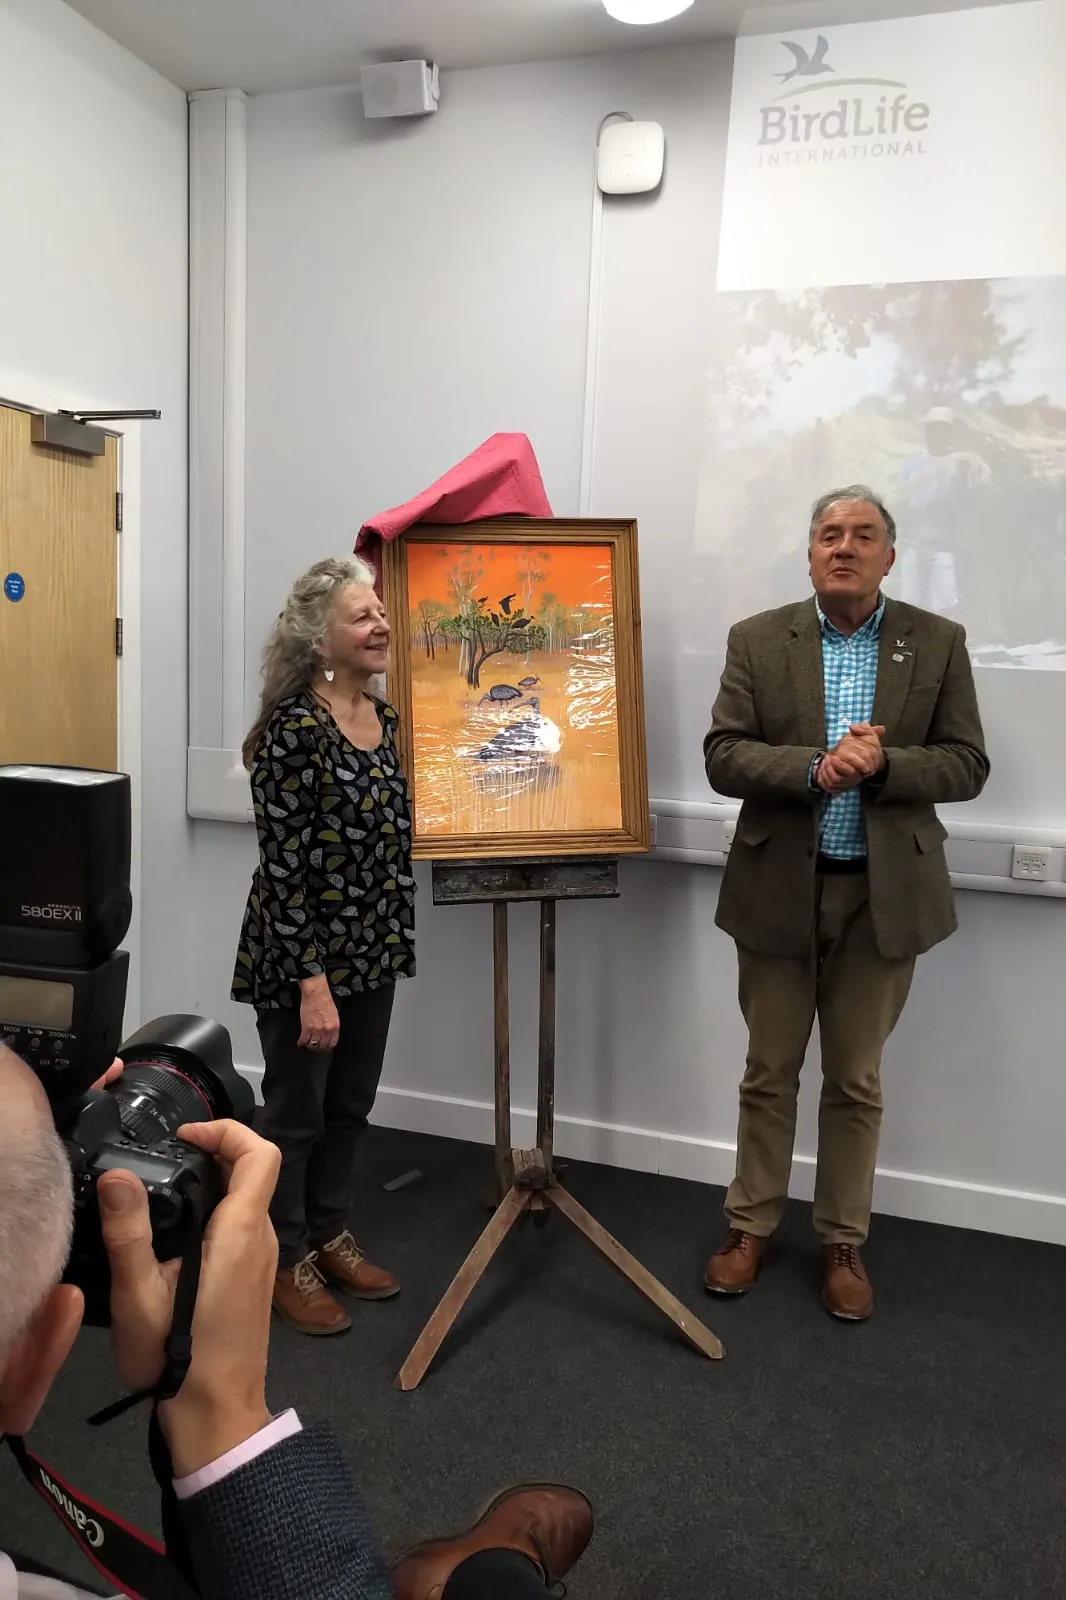 Wildlife artists Carrie Aykroyd and Birdfair founder Tim Appleton with the poster for Birdfair 2019.